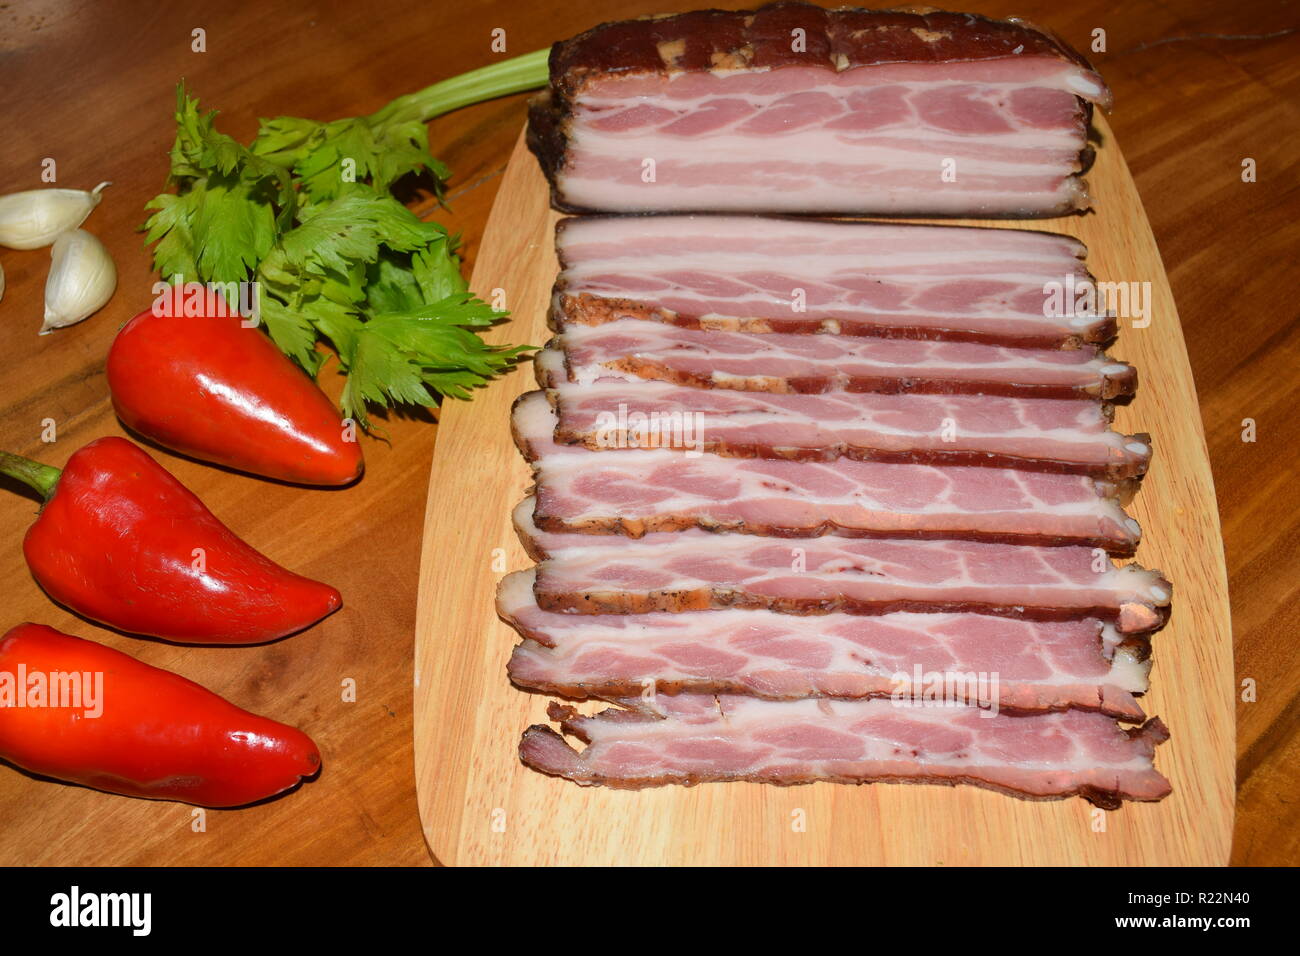 The whole of fame of 'Smoked Bacon'  German – Food, fully cured and smoked pork bacon on wooden plate according to grandmother's recipe and art. Stock Photo